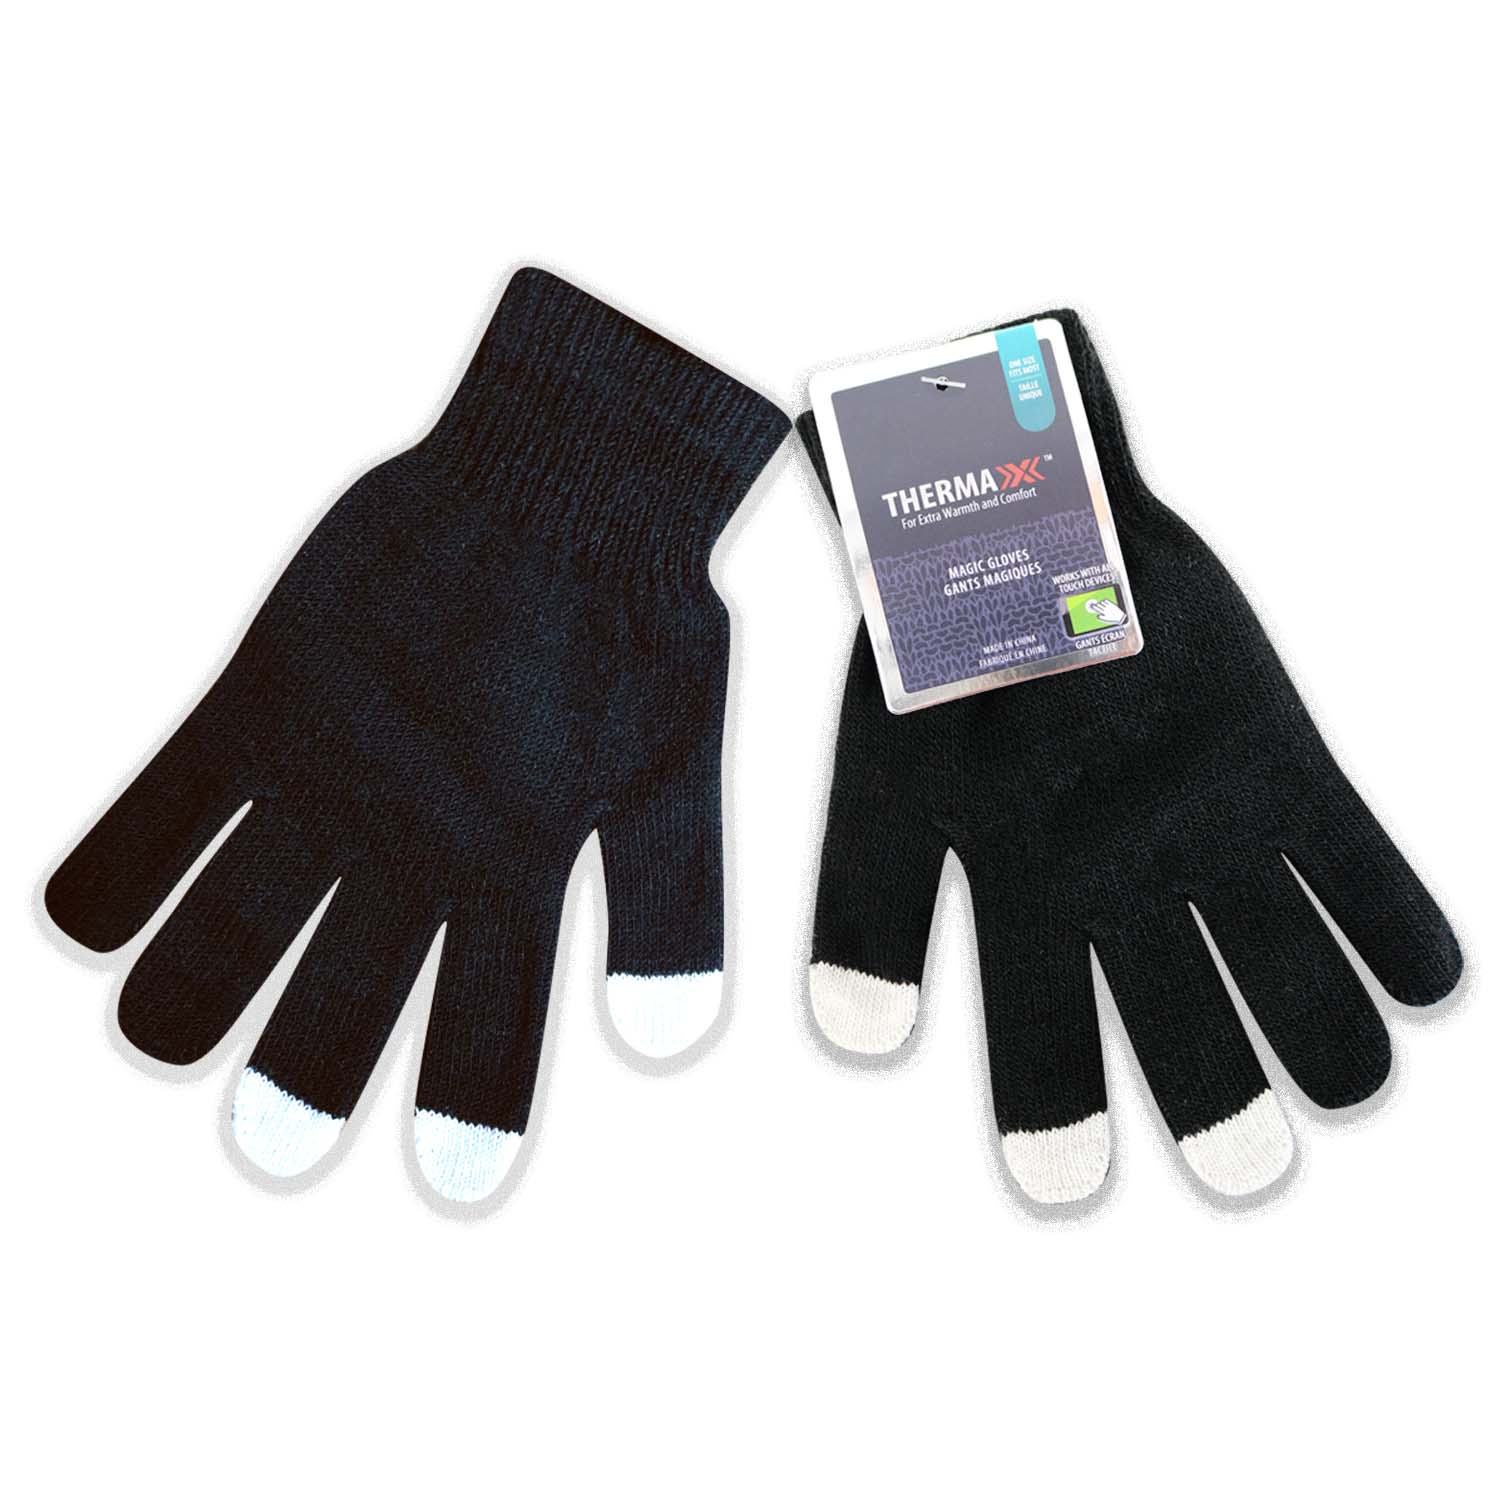 Wholesale Winter Unisex Chenille Touch Screen Gloves in Black- One Size Fits Most - Bulk Case of 96